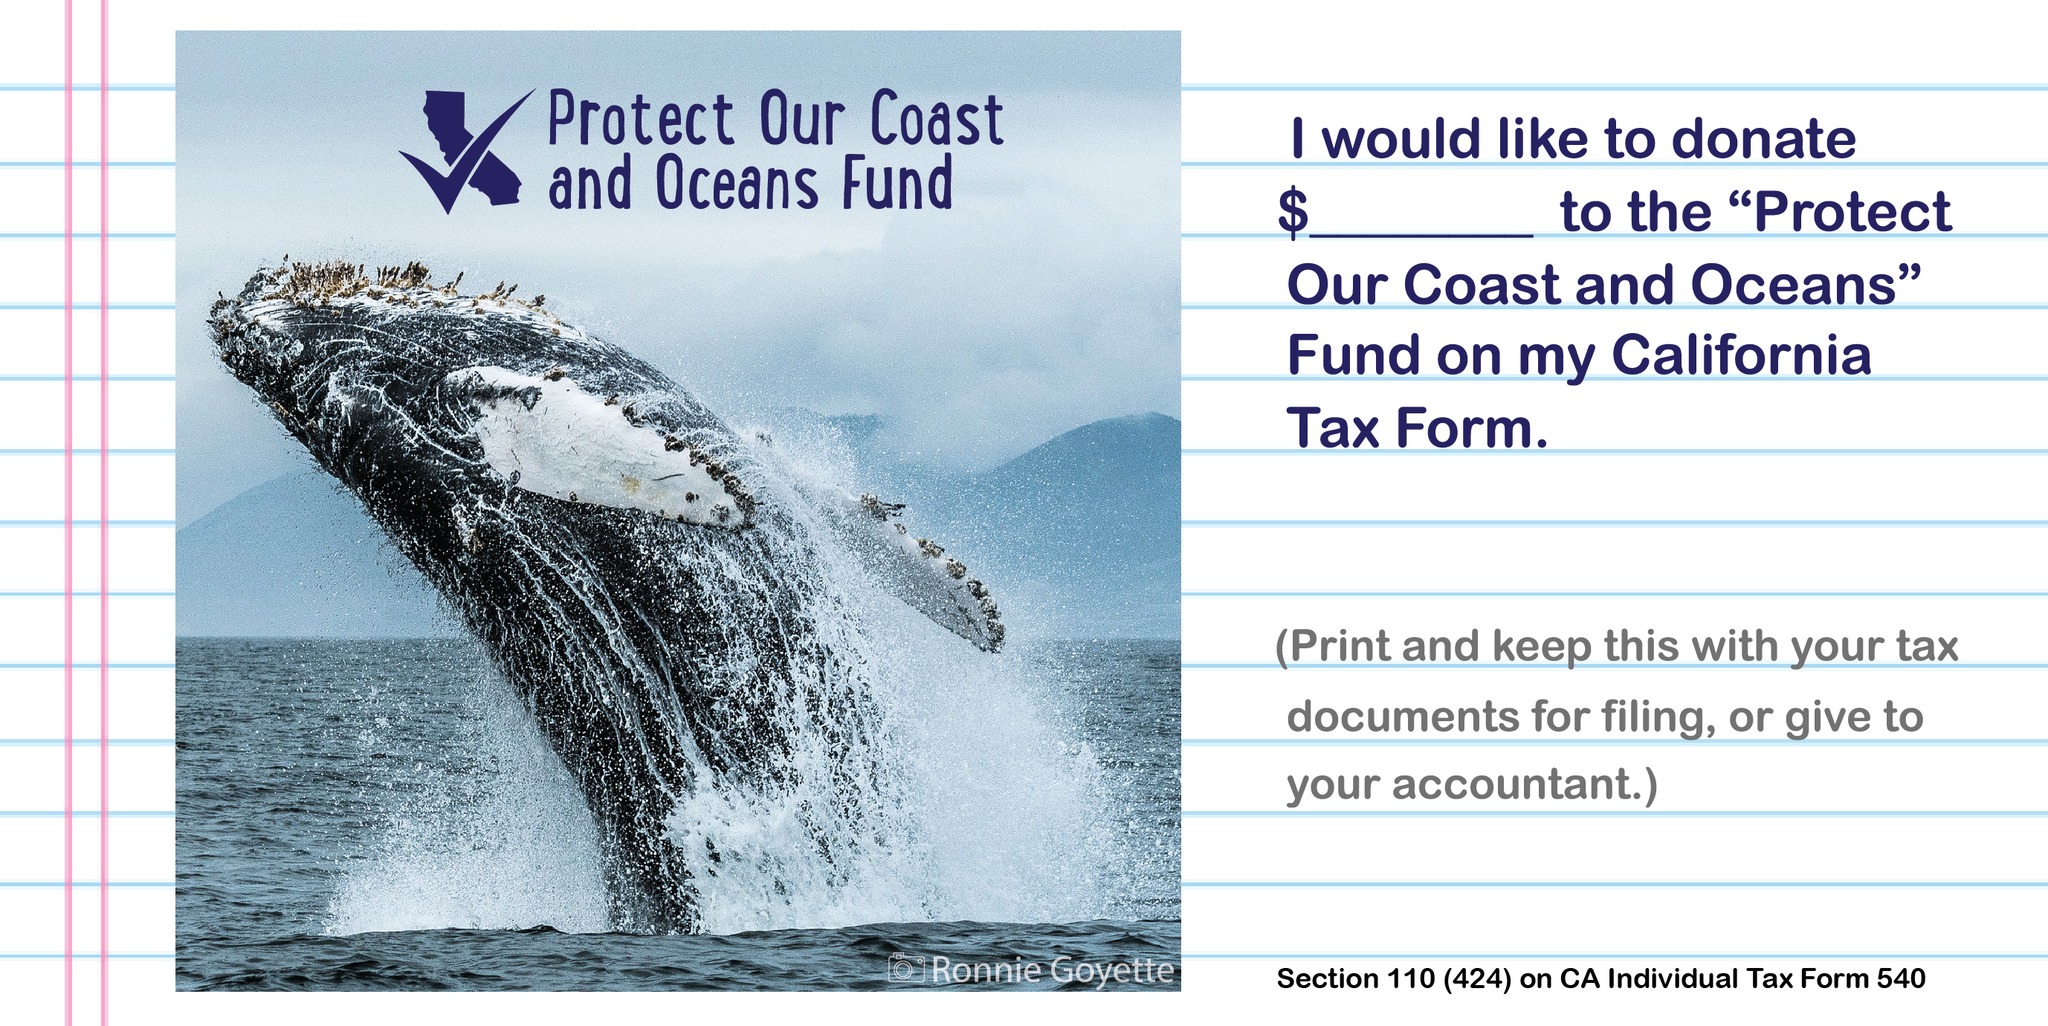 Printable reminder sheet 
									with text stating, I would like to donate fill-in-the-blank $ to the Protect Our Coast & Oceans Fund on my 
									California State Tax Form. Print and keep this with your tax document for filing or give to your accountant. 
									Section 110, 424, on CA Individual Tax Form 540